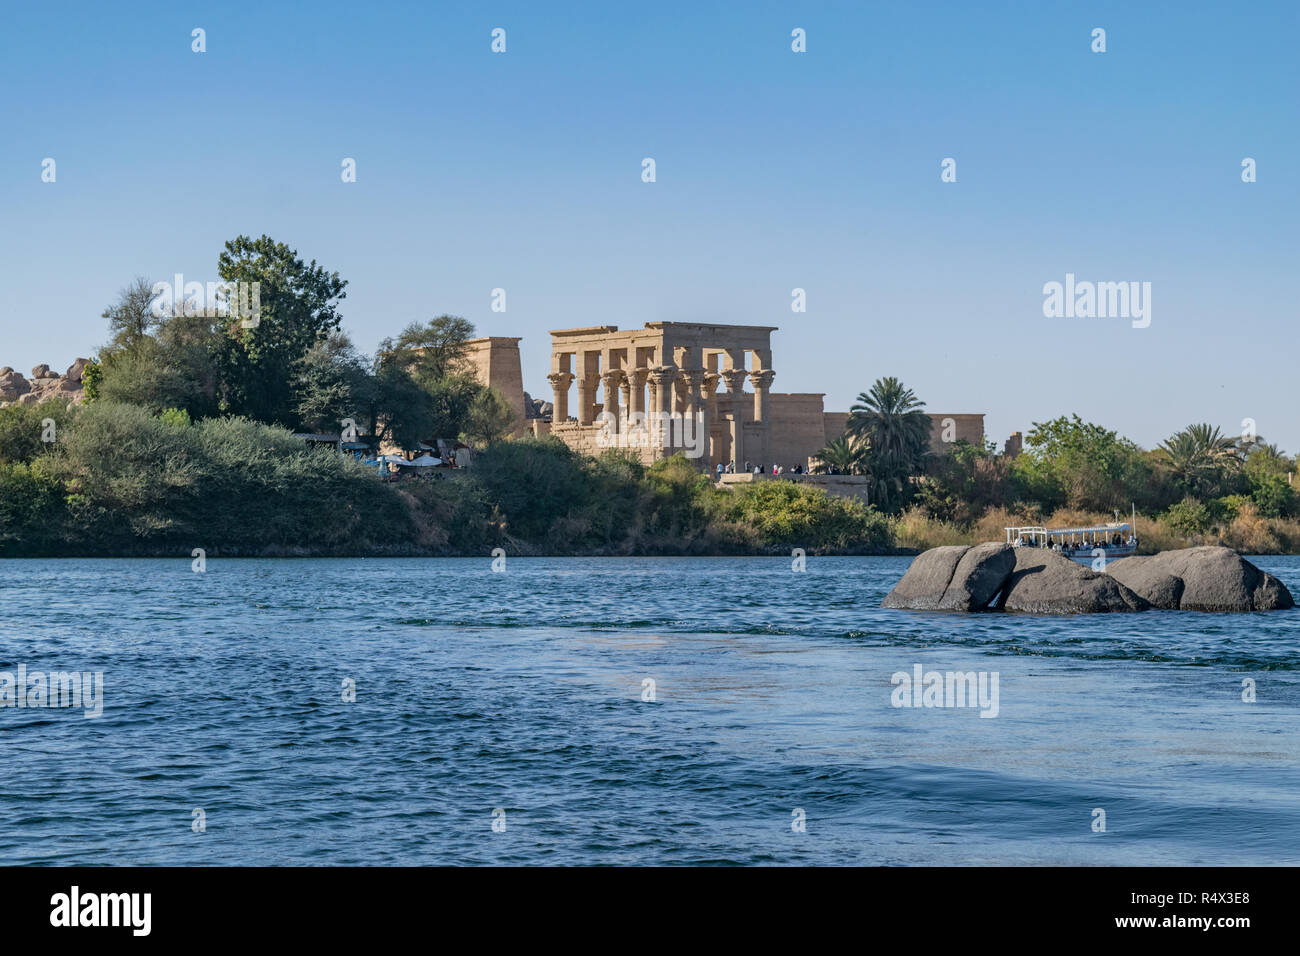 Philae temple and island in the reservoir of the Aswan Low Dam, downstream of the Aswan Dam and Lake Nasser, Egypt. Stock Photo